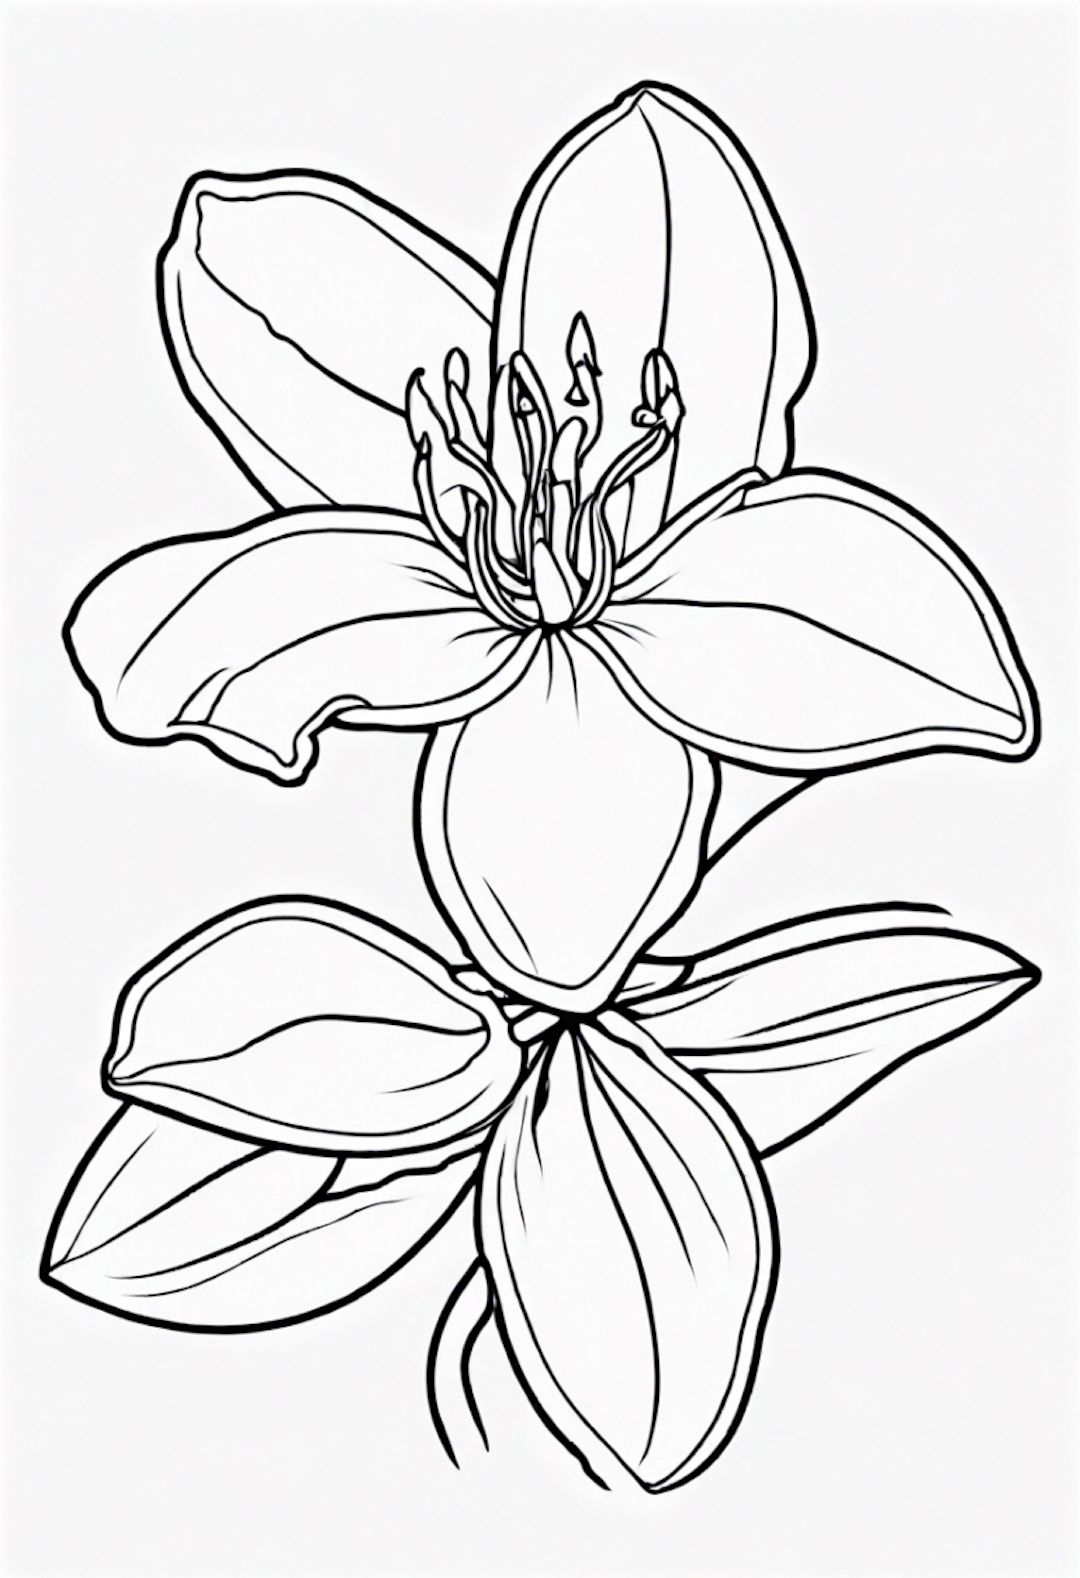 Blooming Lily Coloring Page coloring pages